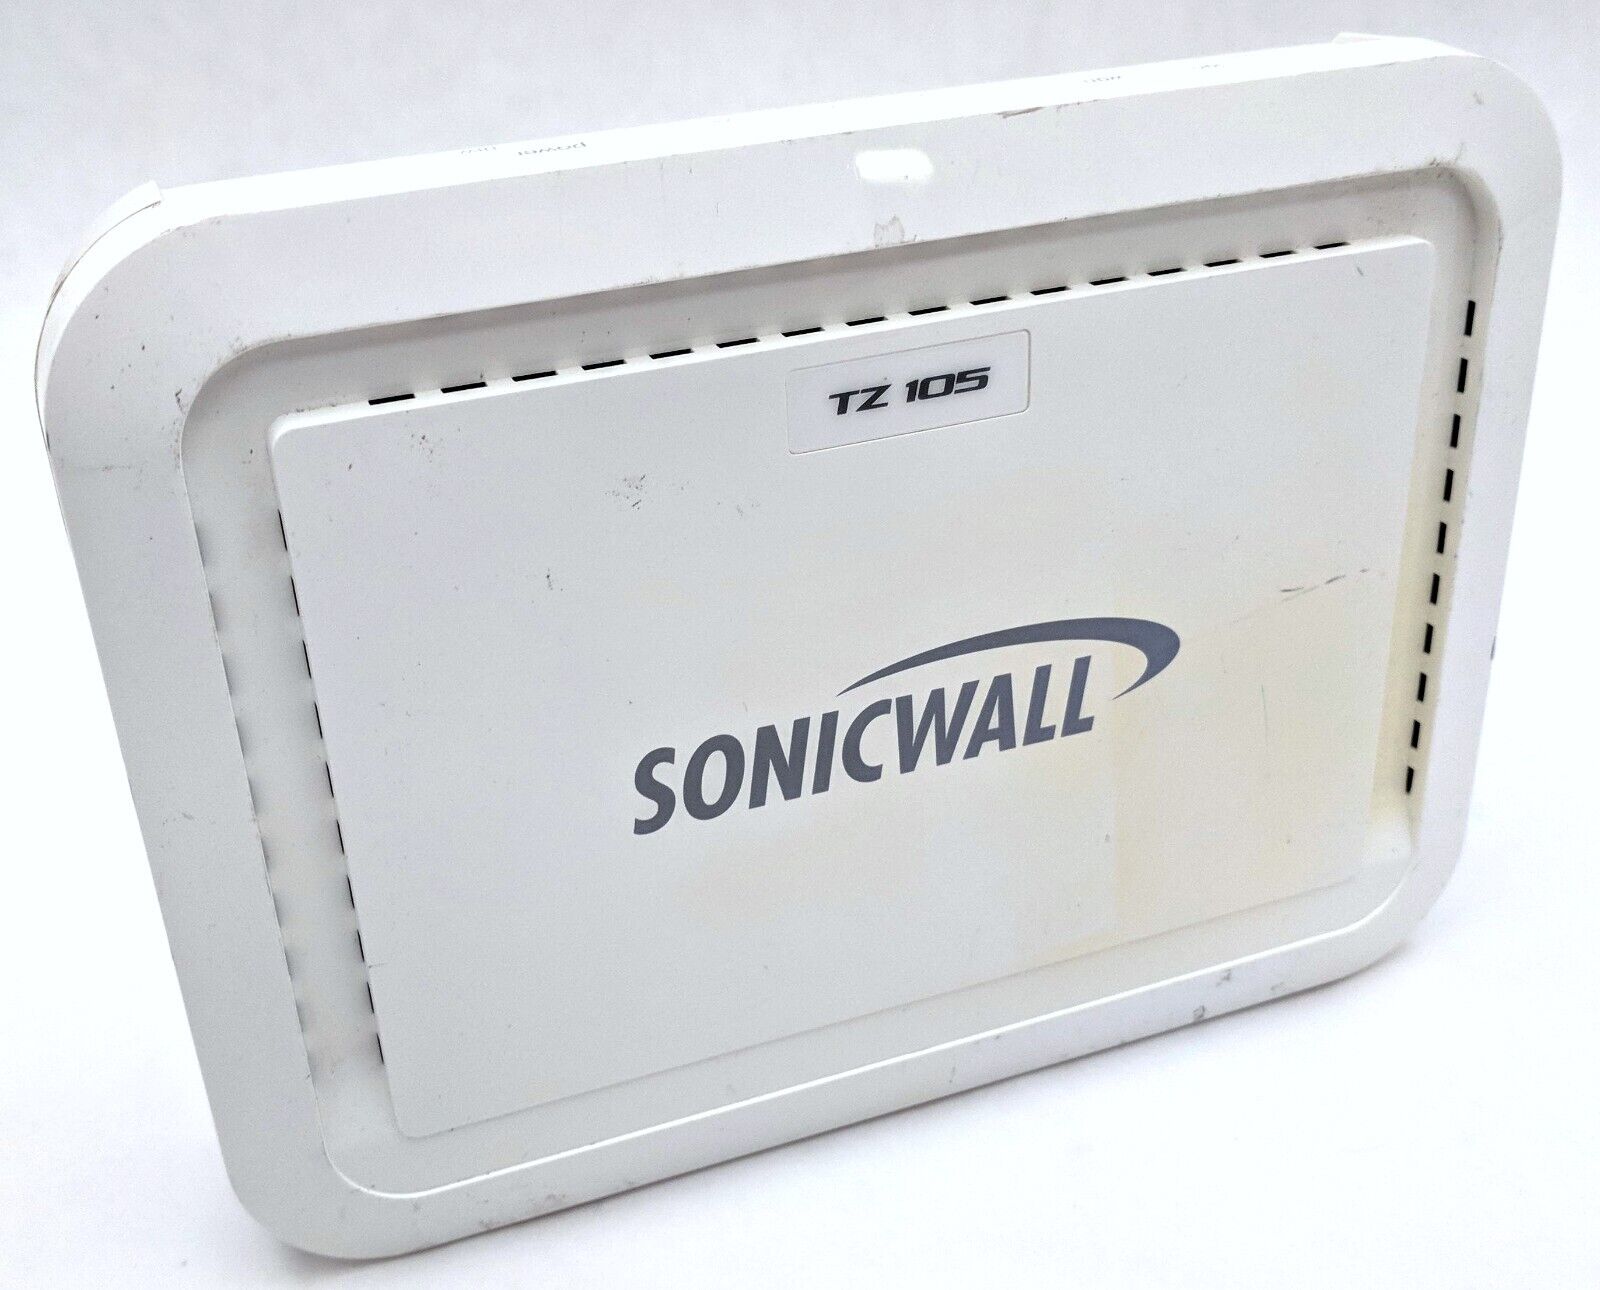 SonicWALL TZ105 Network Security Appliance TZ 105 - No Power Supply - UNLICENSED